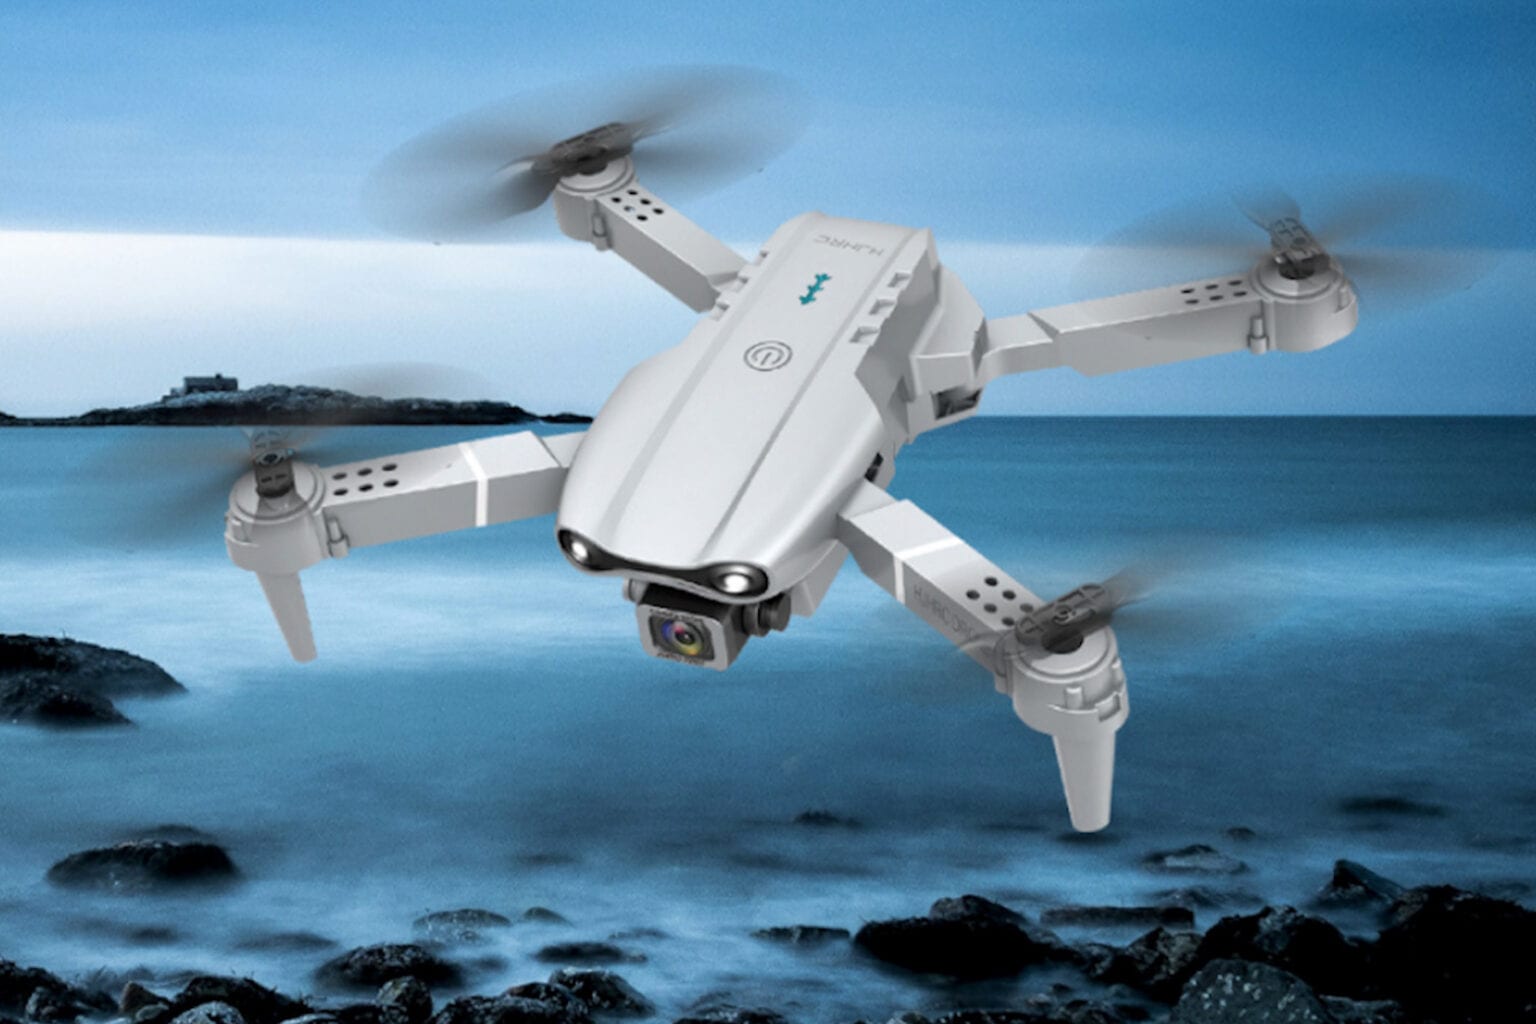 Score over a 60% discount on this 2-pack of 4K camera drones right now.